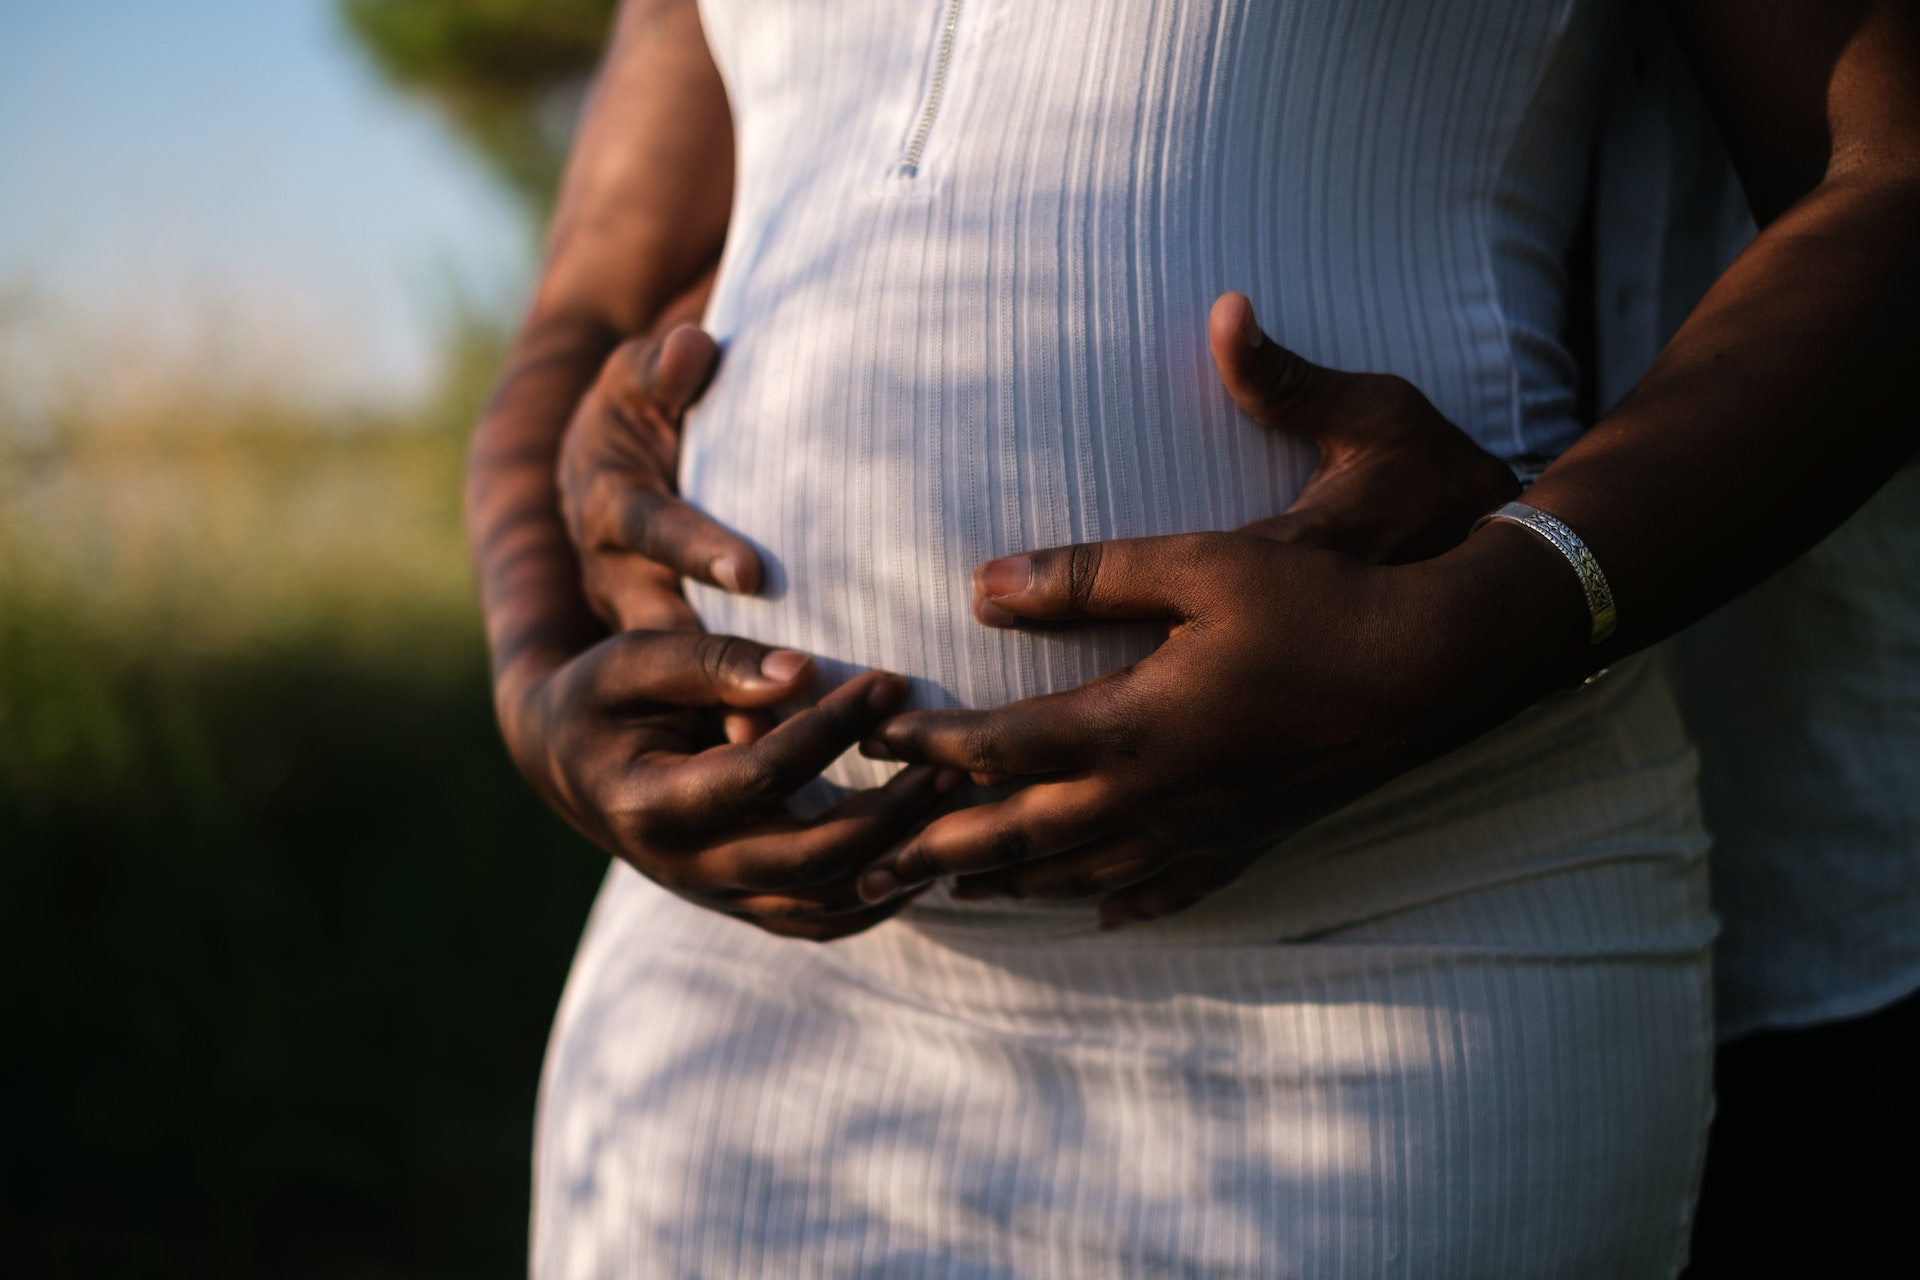 Black expectant mother wearing white dress with her hands and the hands of black father behind her on her pregnancy bump